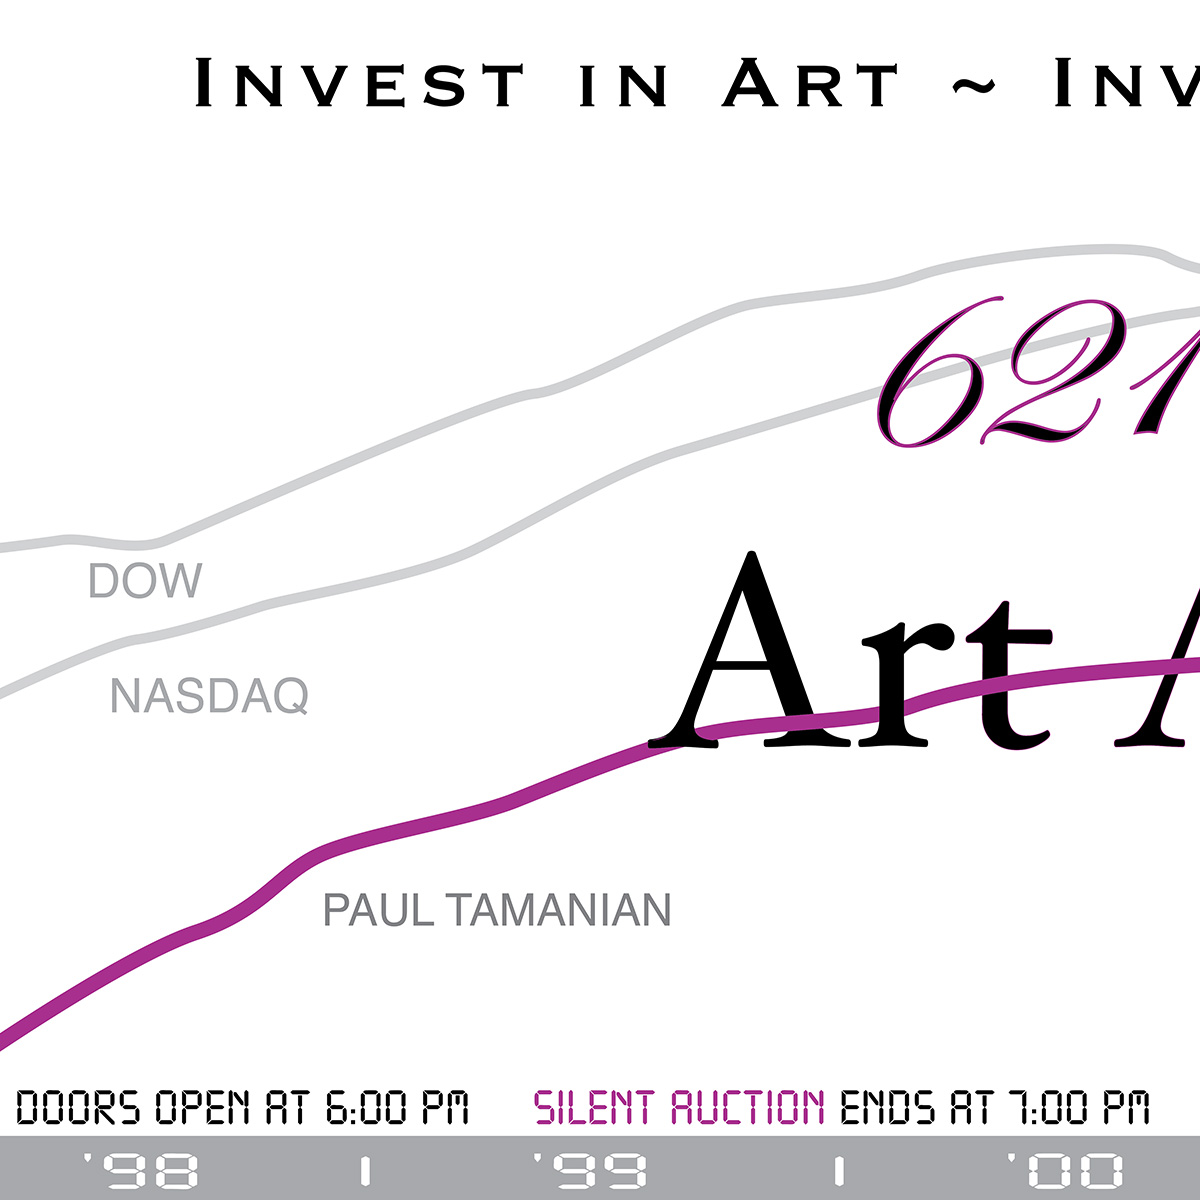 wine label auction banner depicting art as an investment